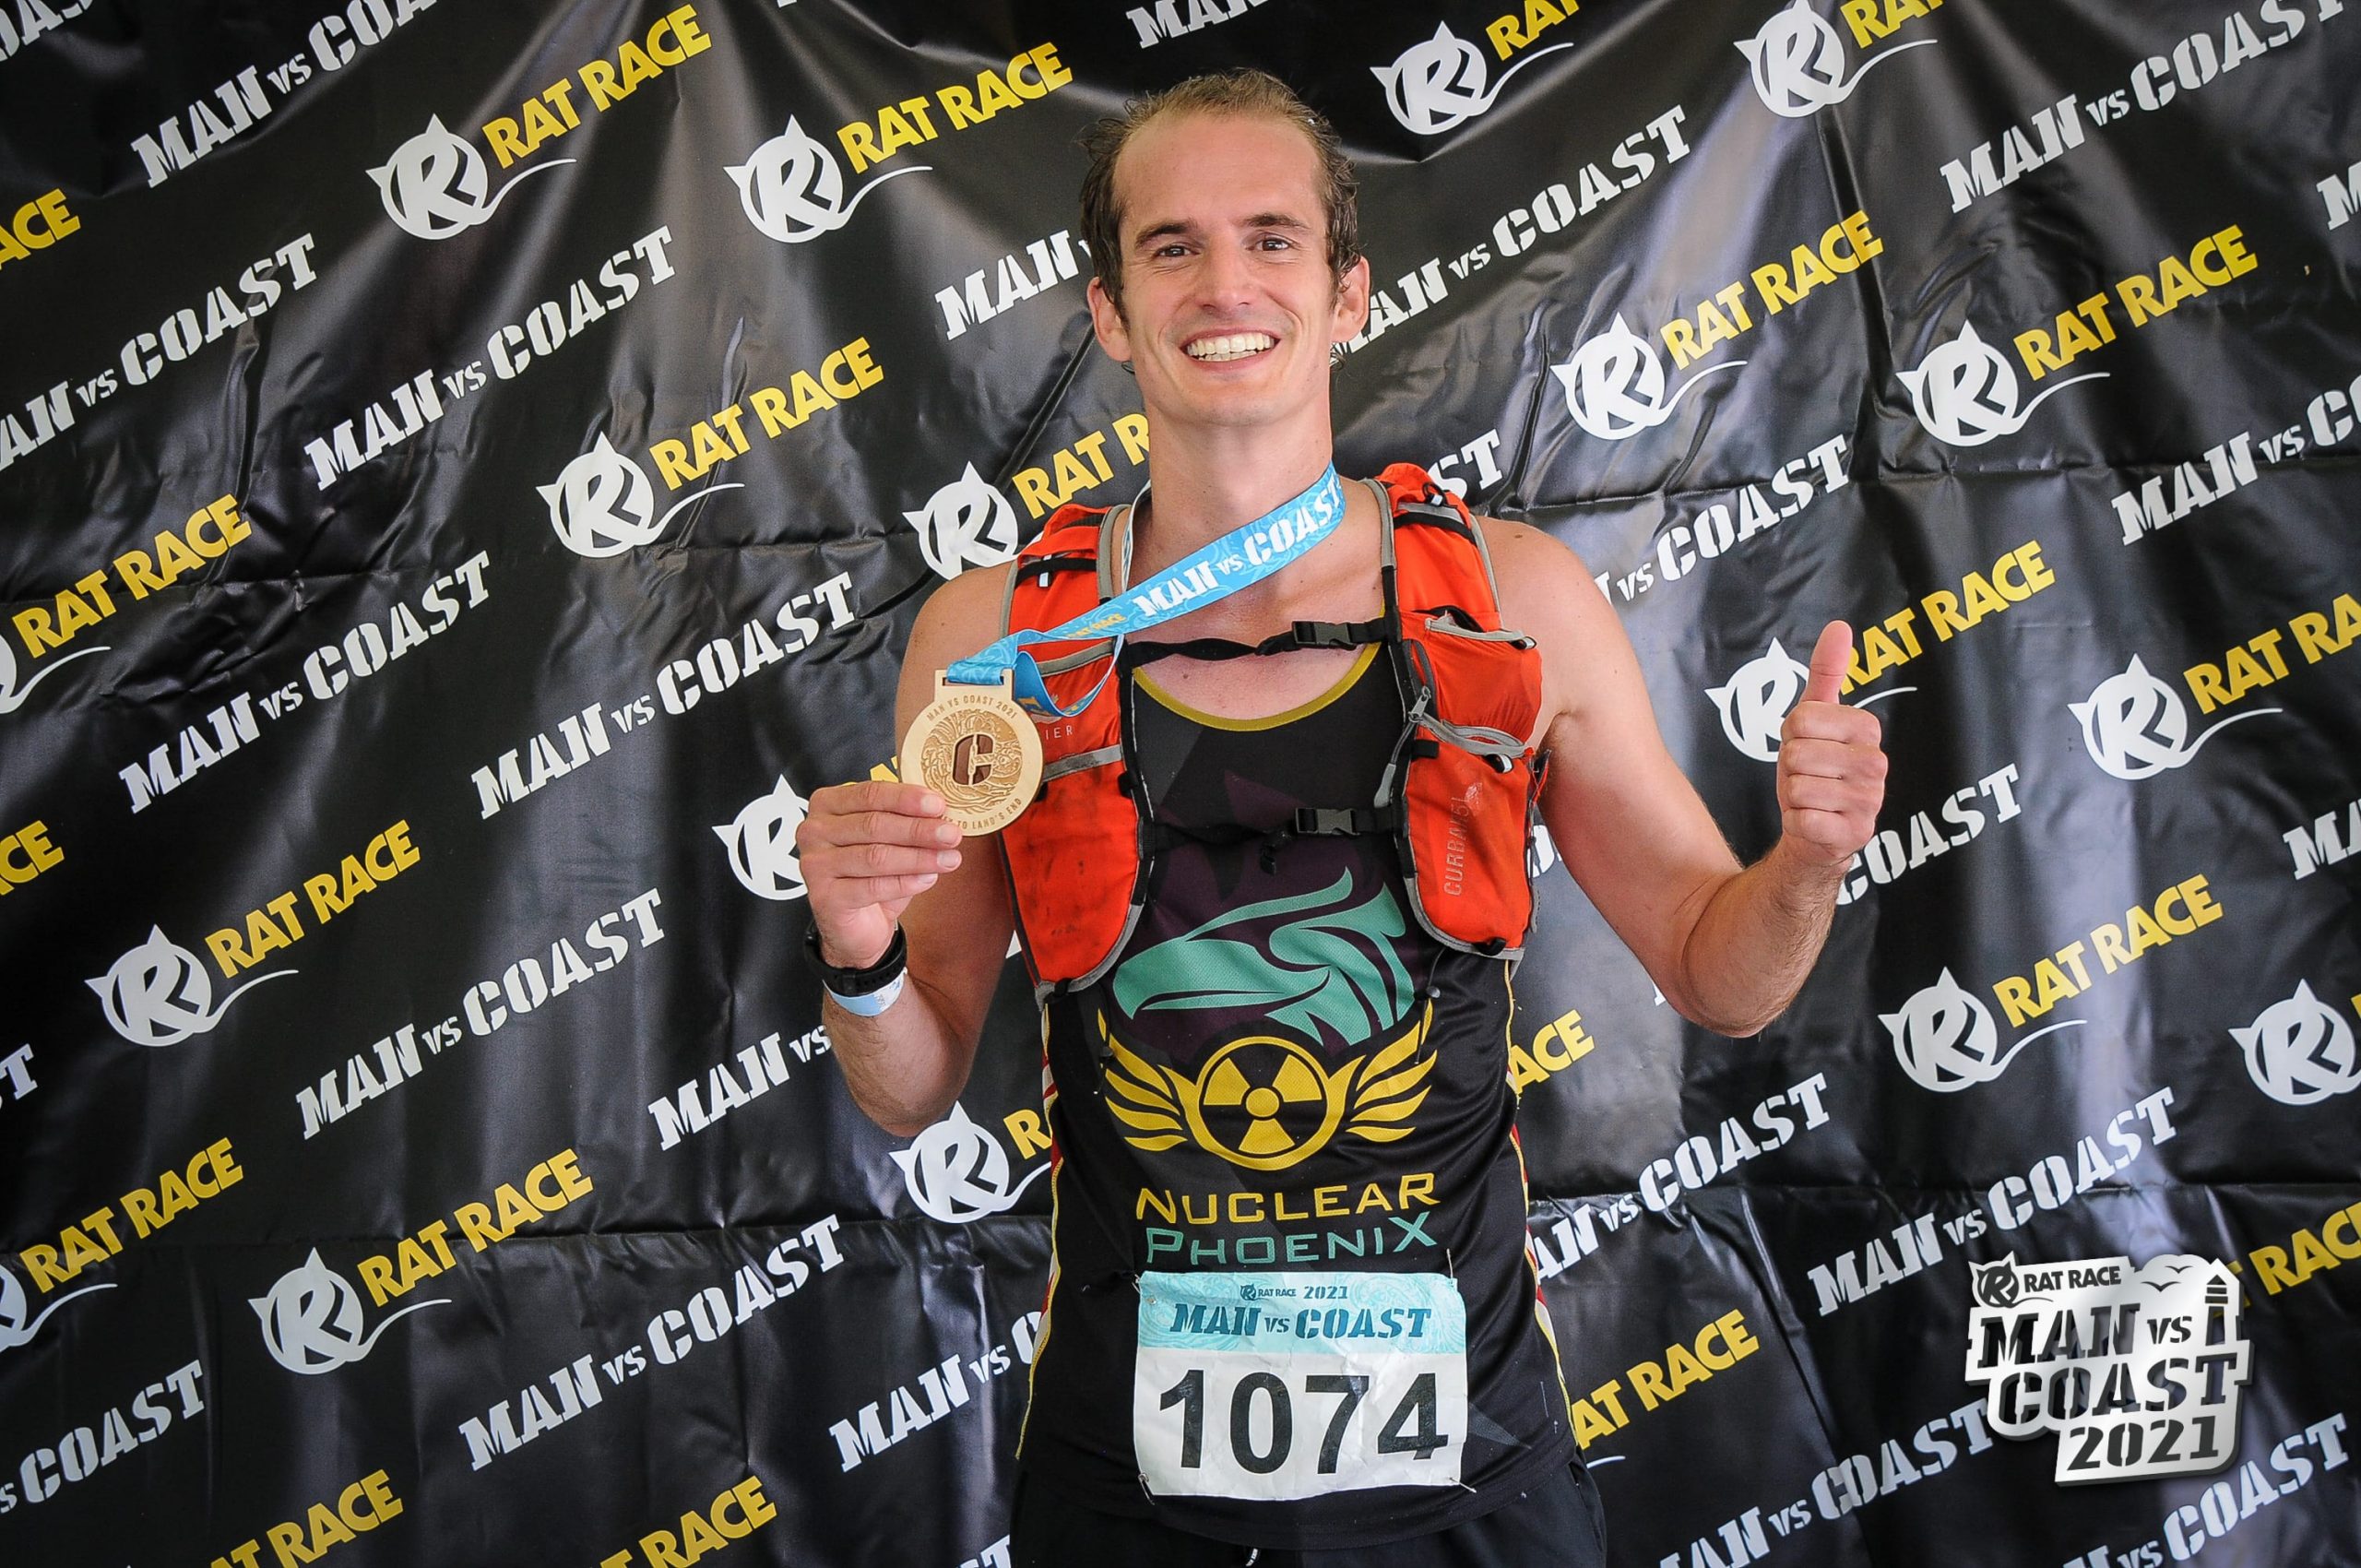 The Man vs. Coast finisher photo with medal in hand.